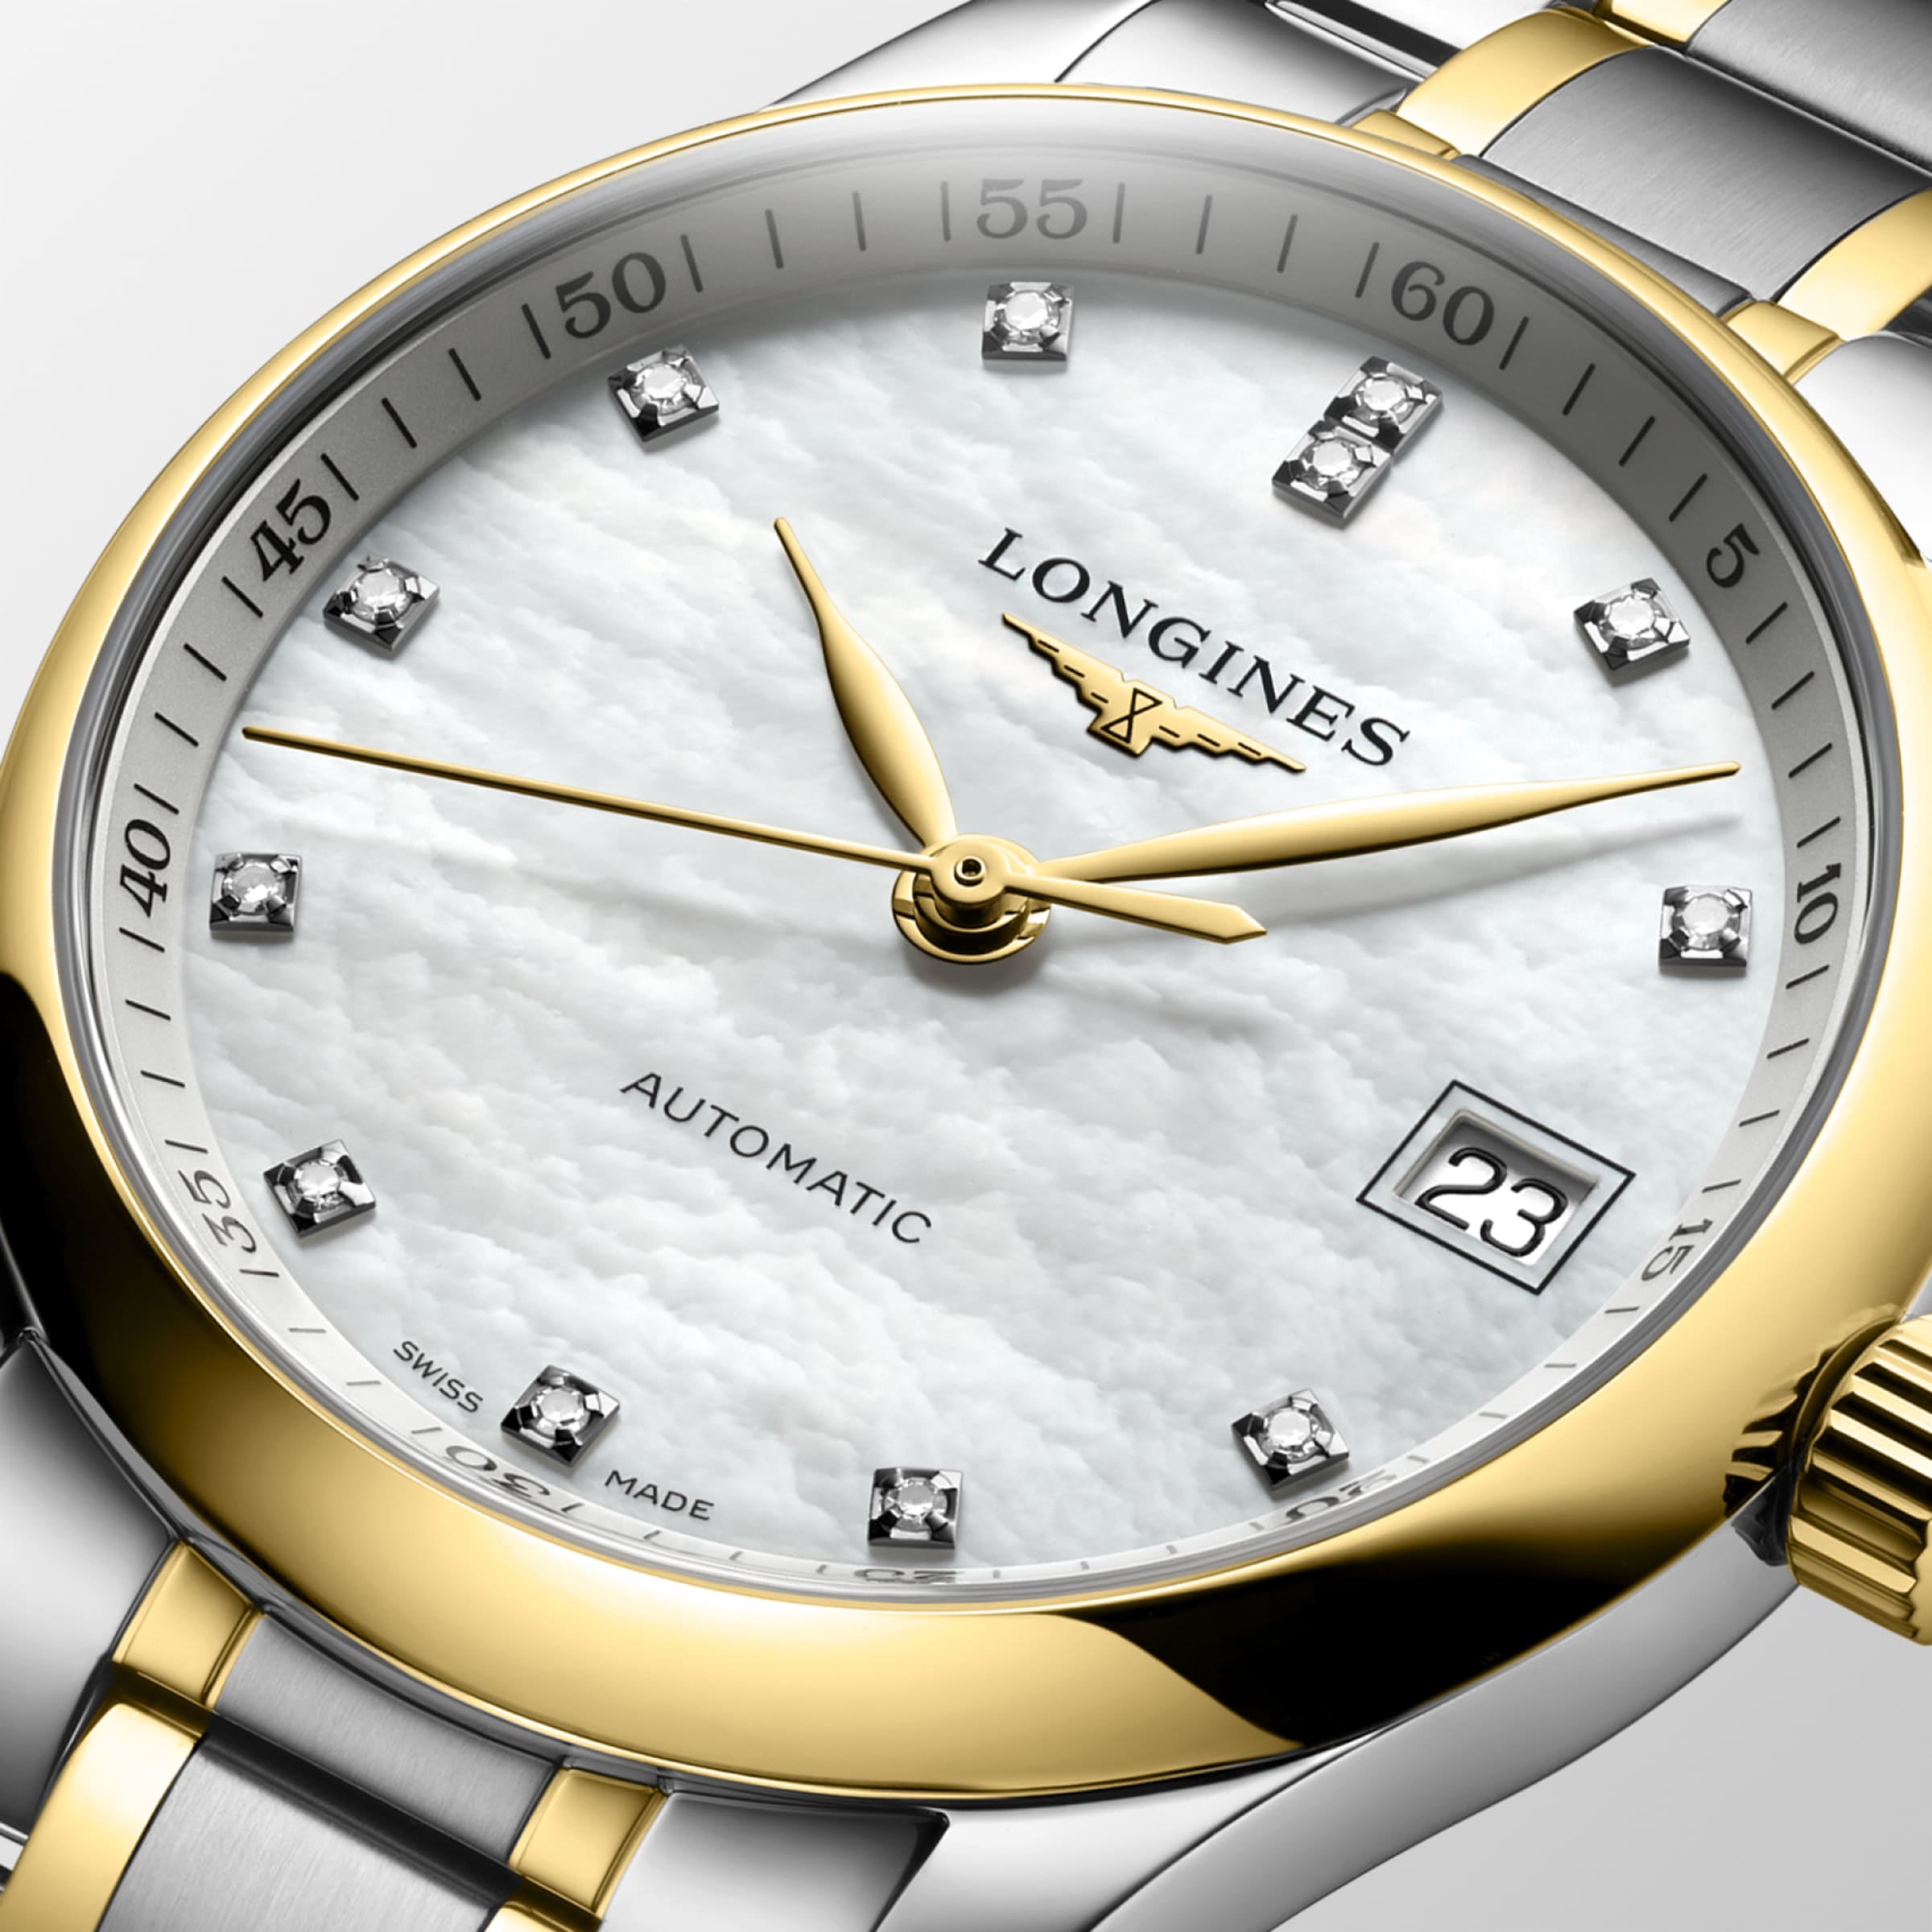 Longines MASTER COLLECTION Automatic Stainless steel and 18 karat yellow gold cap 200 Watch - L2.357.5.87.7